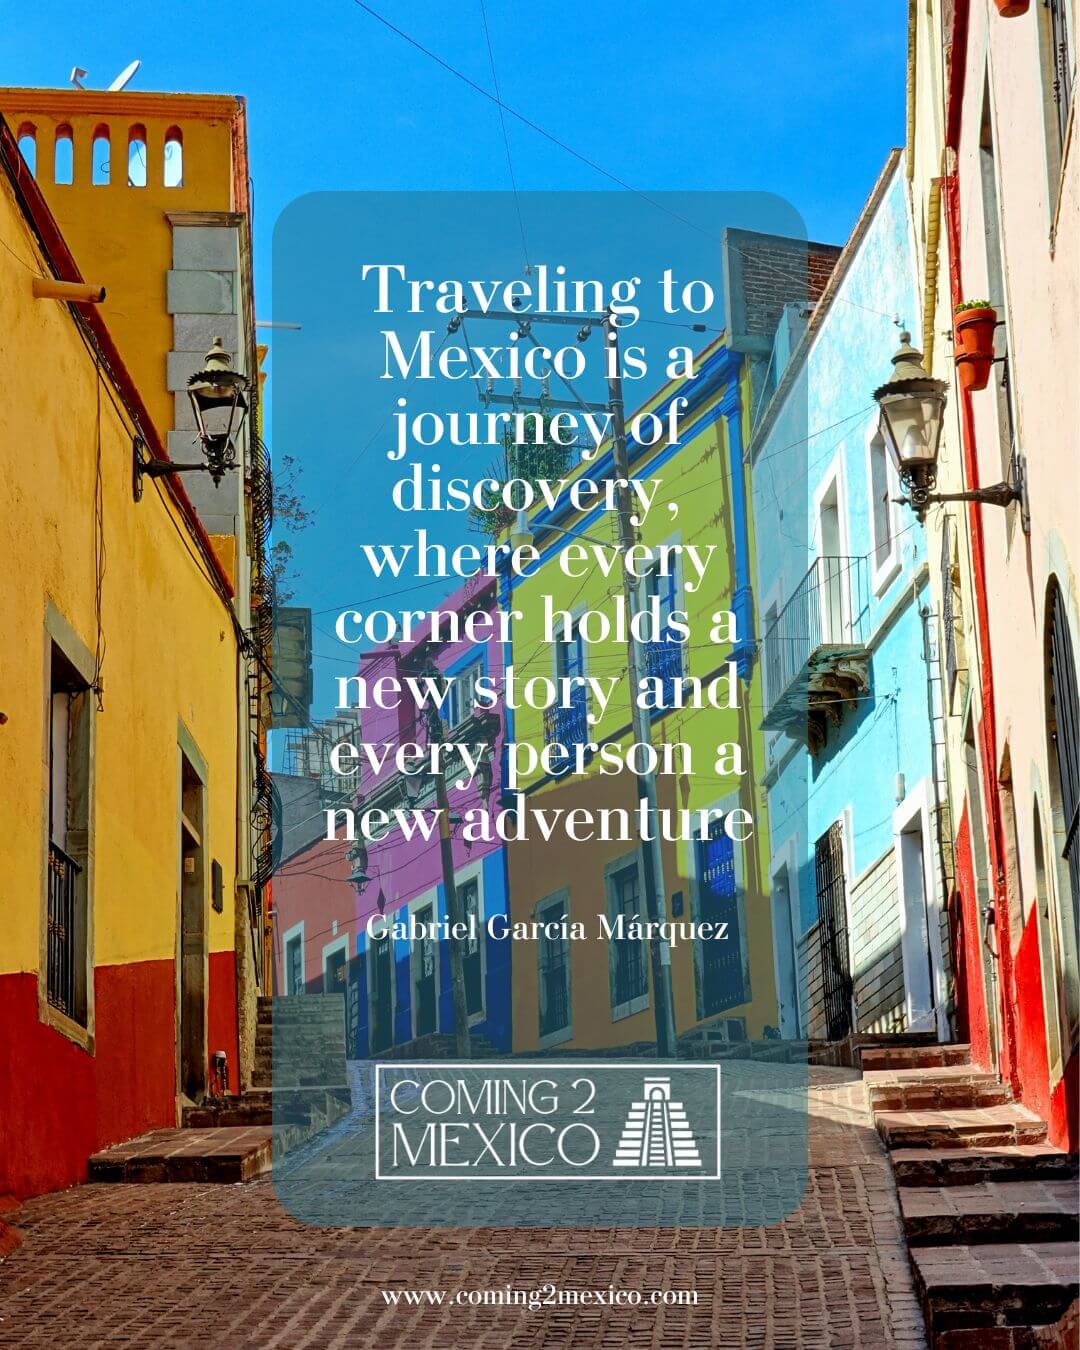 “Traveling to Mexico is a journey of discovery, where every corner holds a new story and every person a new adventure.” – Gabriel García Márquez